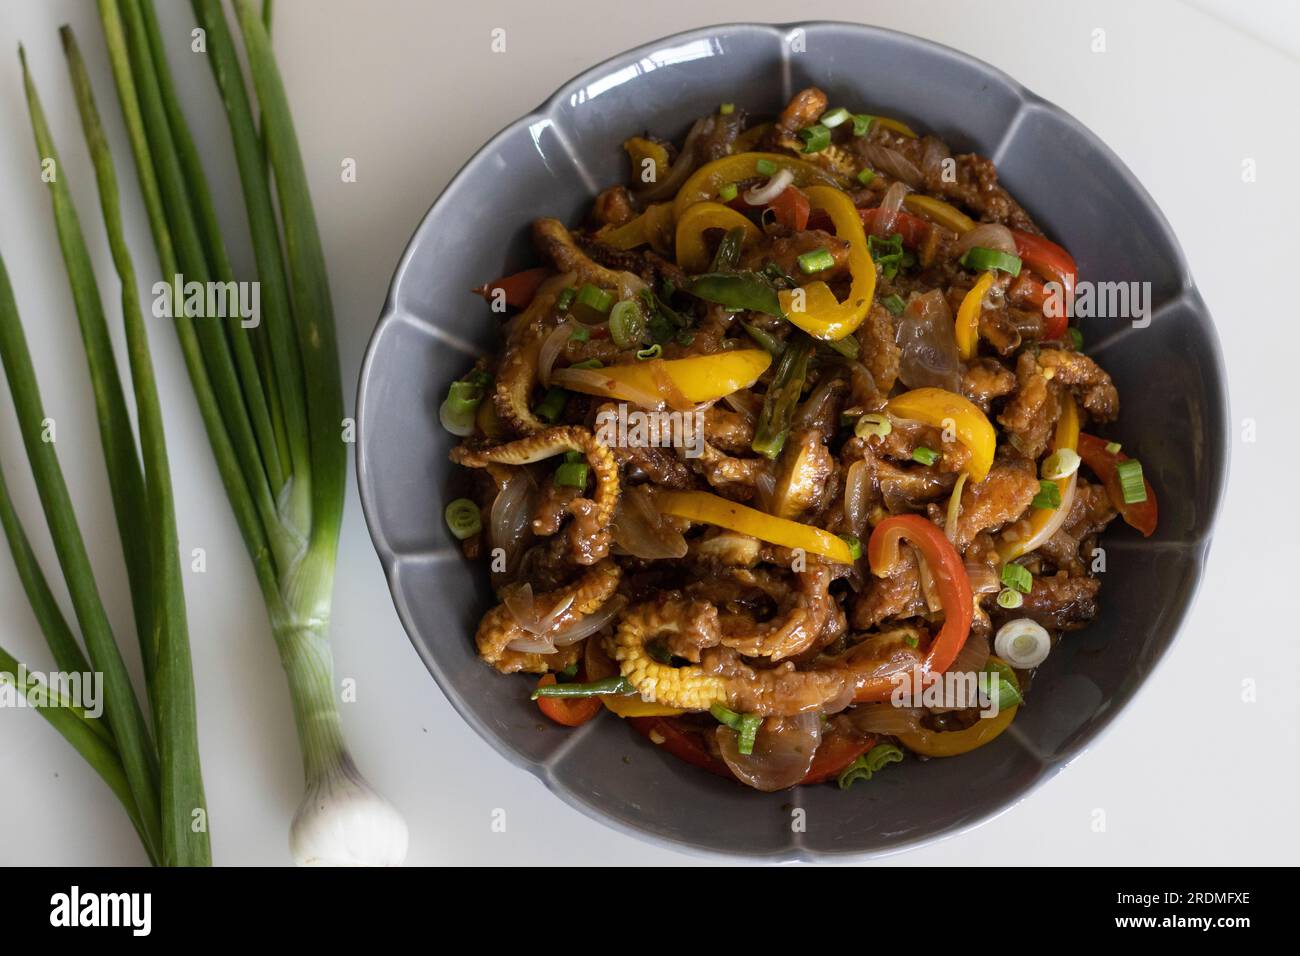 Baby corn chilly. An Indo Chinese dish with crisp fried baby corn in a spicy sauce with sauteed onions and bell peppers. Shot on white background Stock Photo